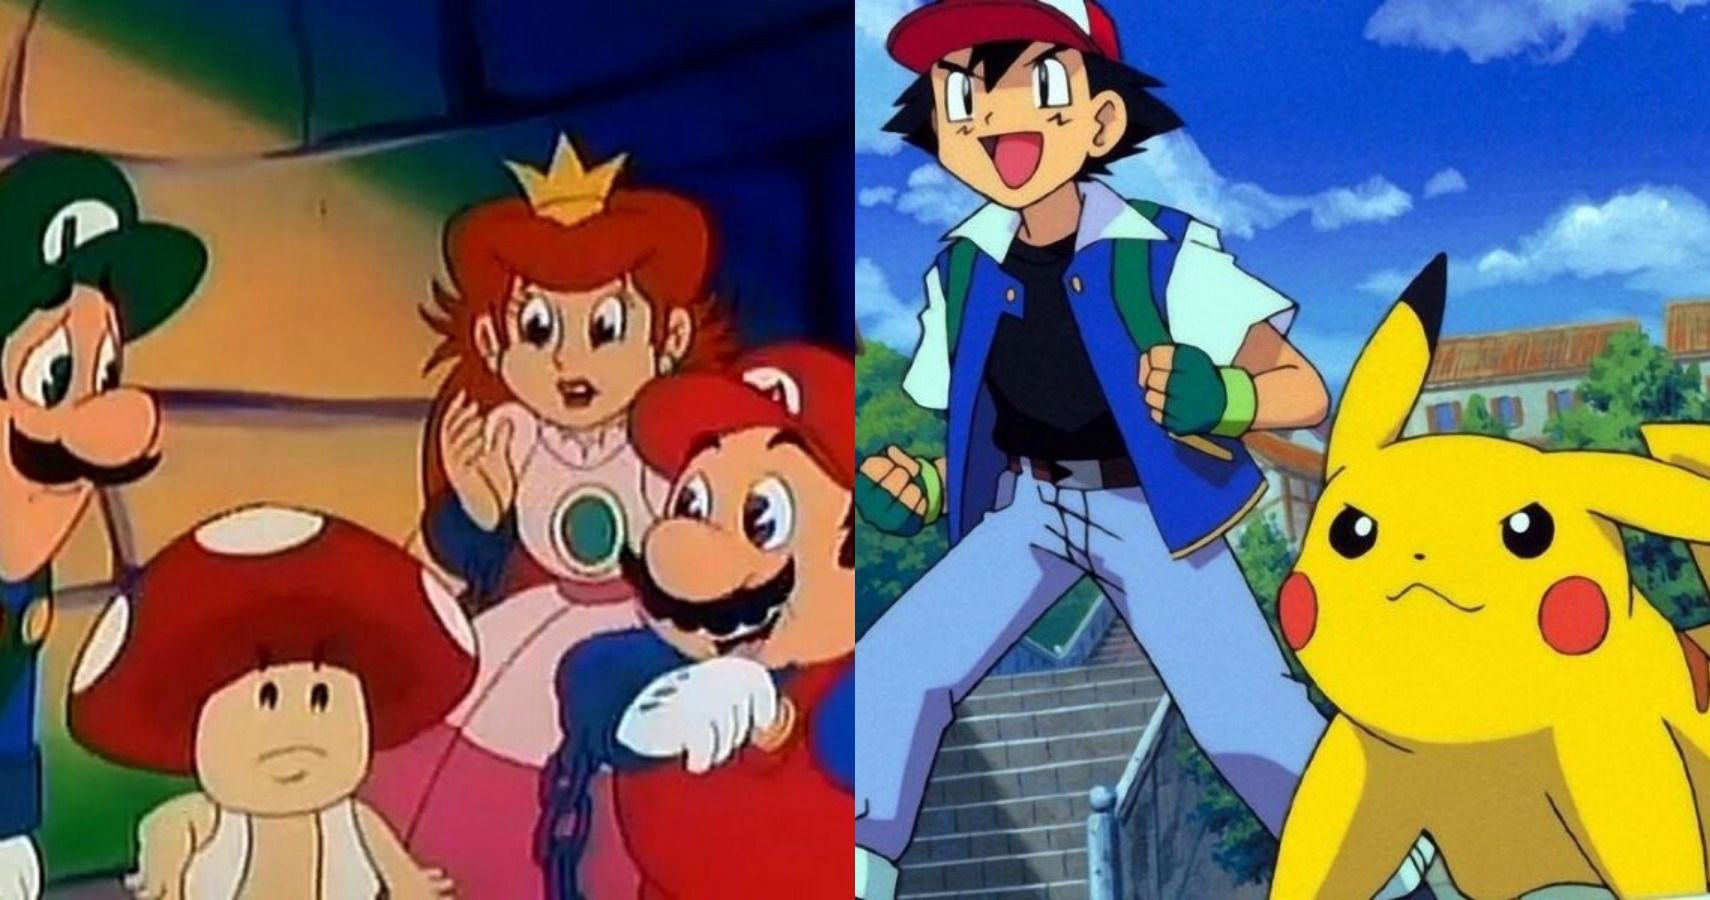 Every Classic Nintendo Cartoon From The 80s & 90s, Ranked From Worst To